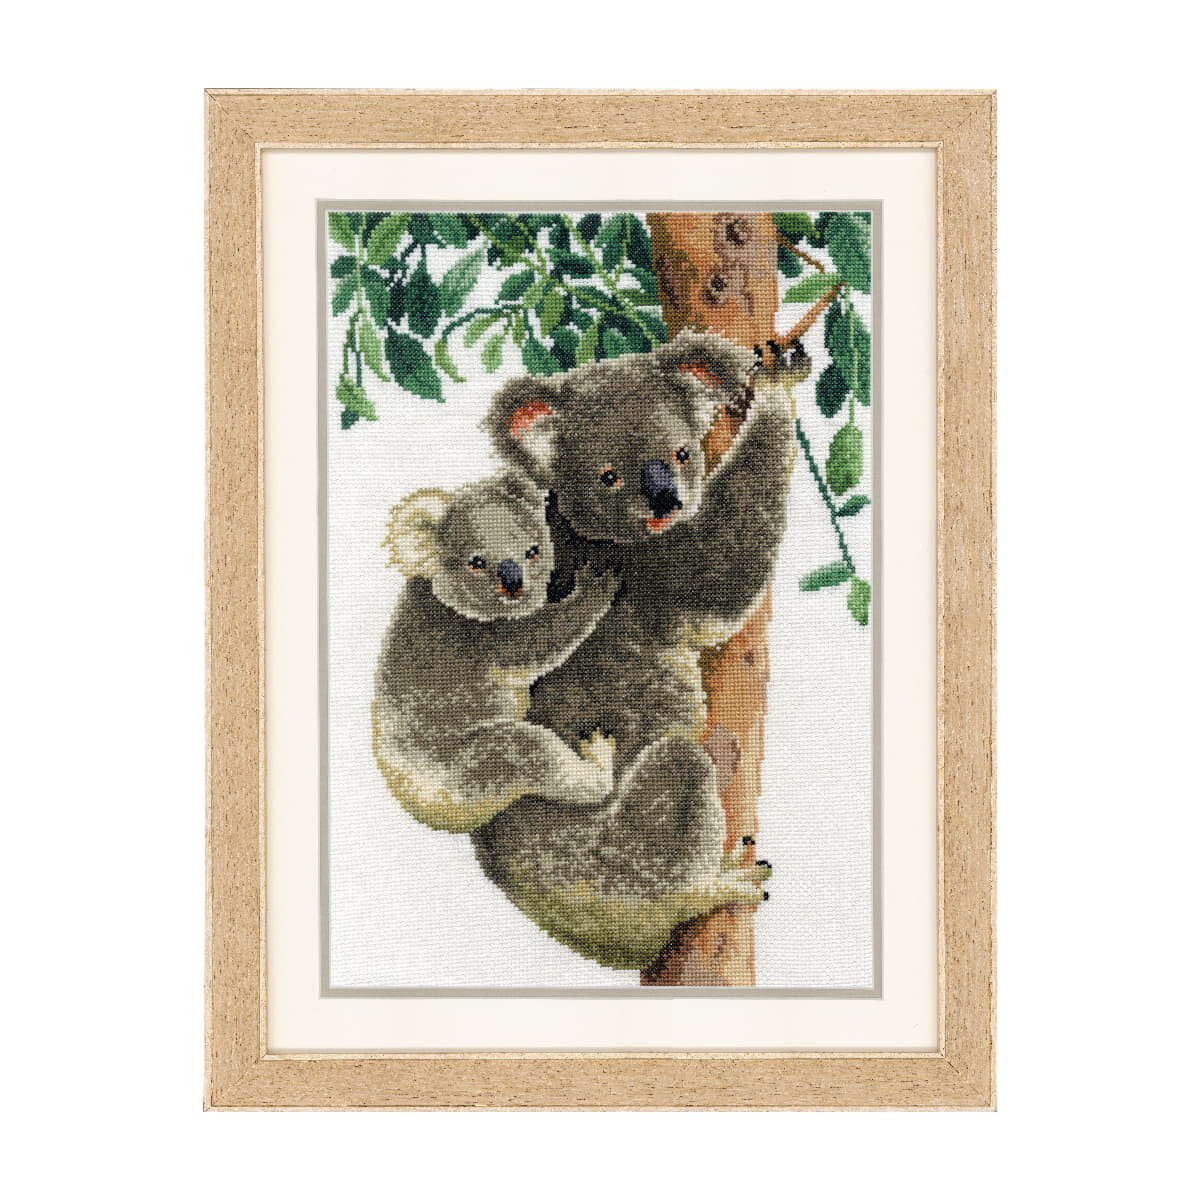 Vervaco counted cross stitch kit "Koala with...